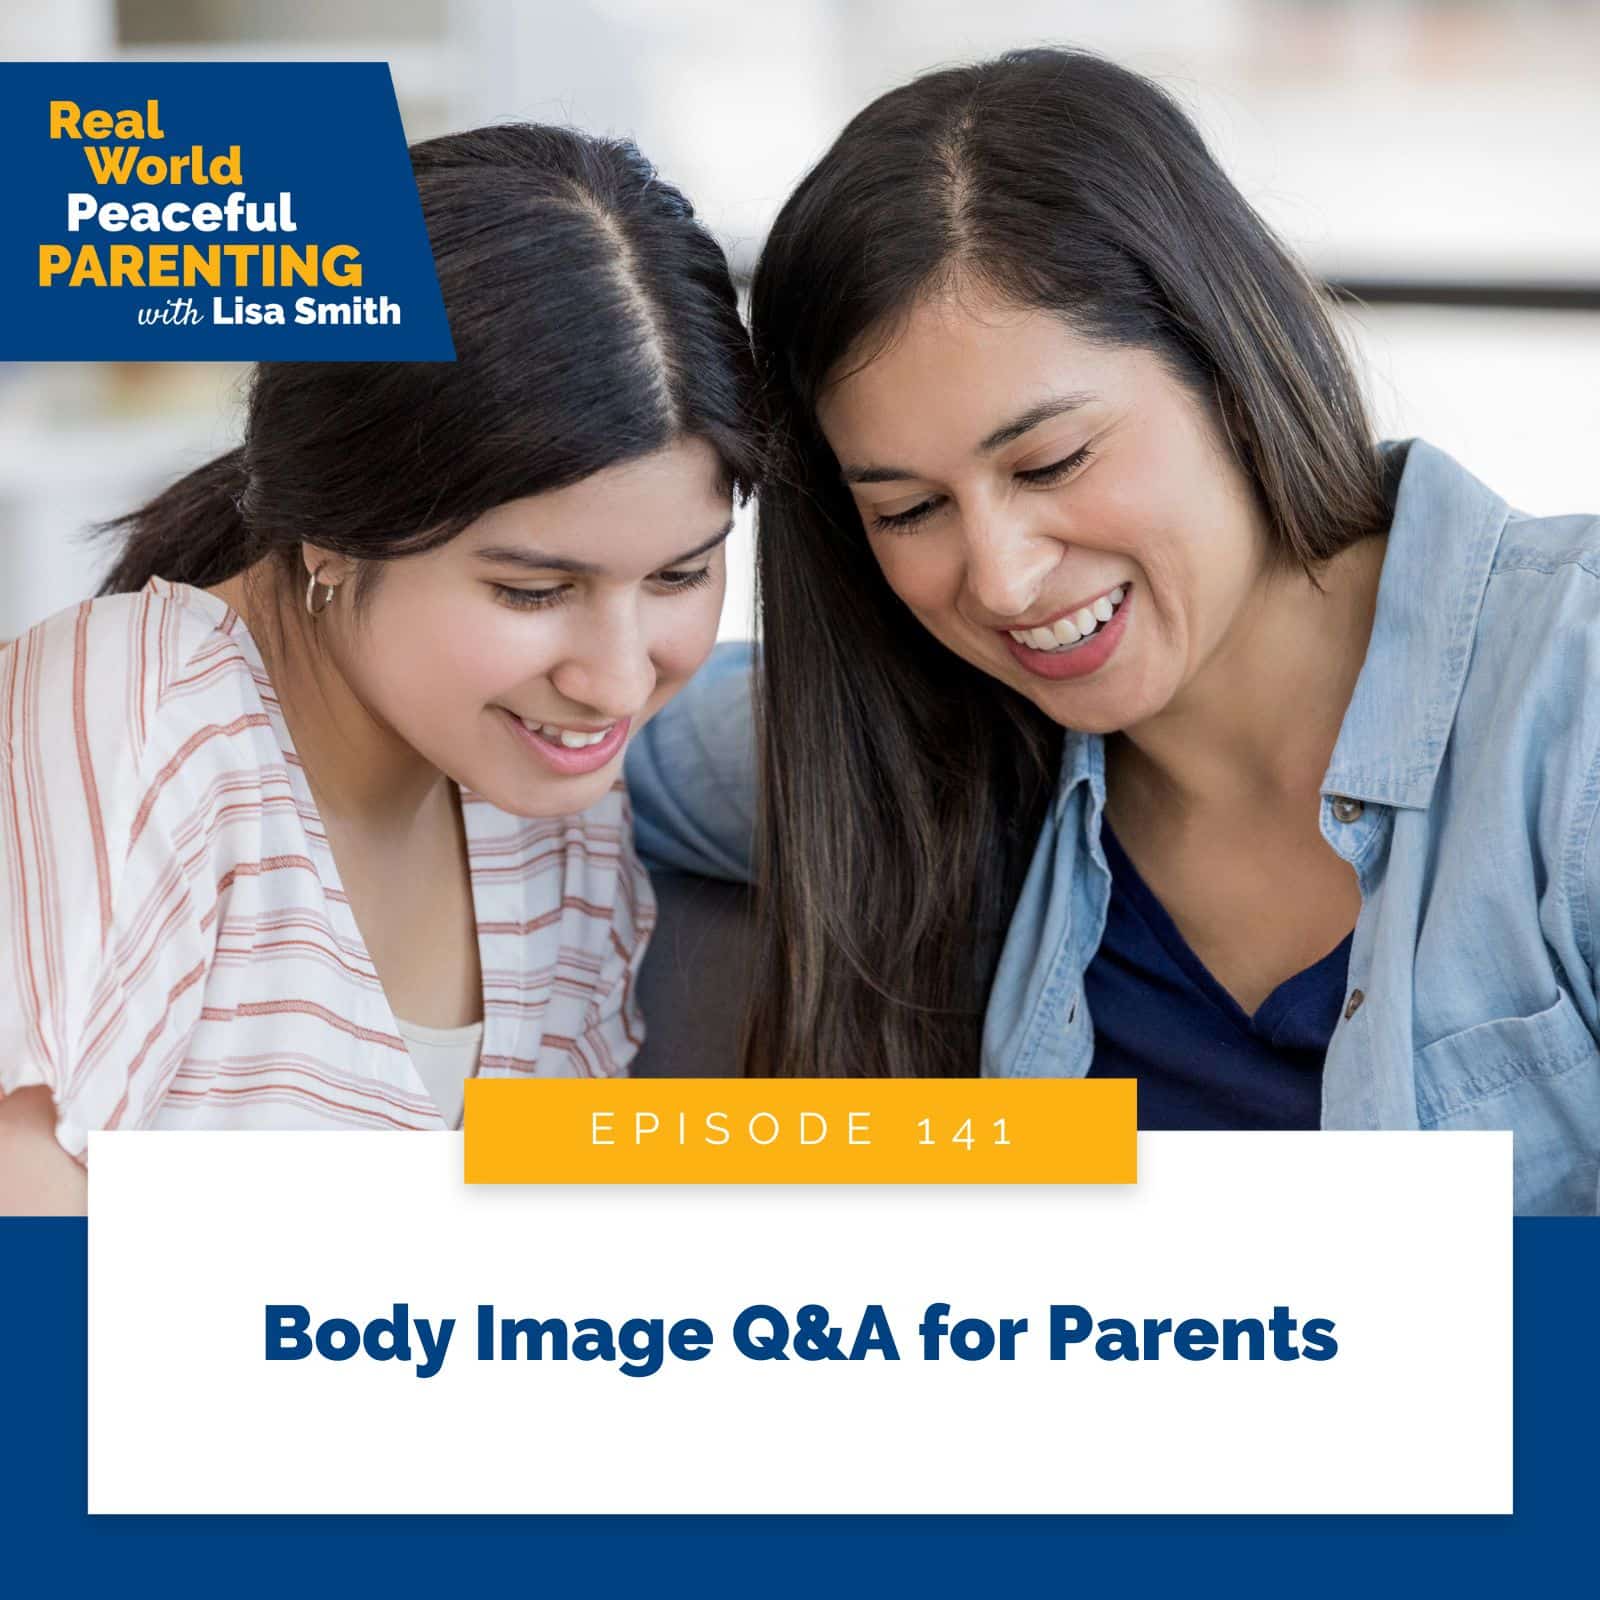 Real World Peaceful Parenting Lisa Smith | Body Image Q&A for Parents